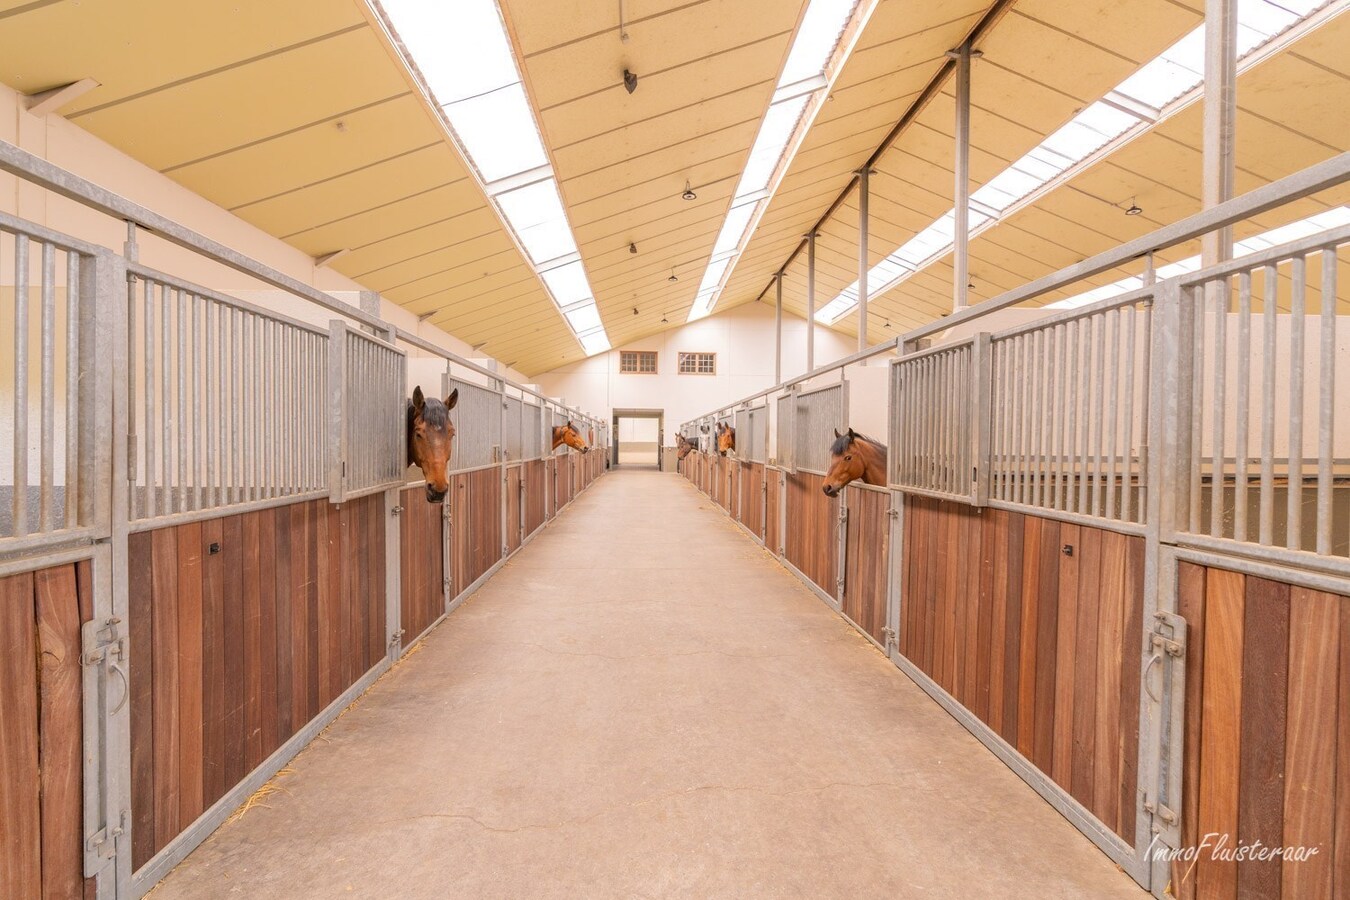 One of a kind equestrian domain on approximately 5.1 hectares. 